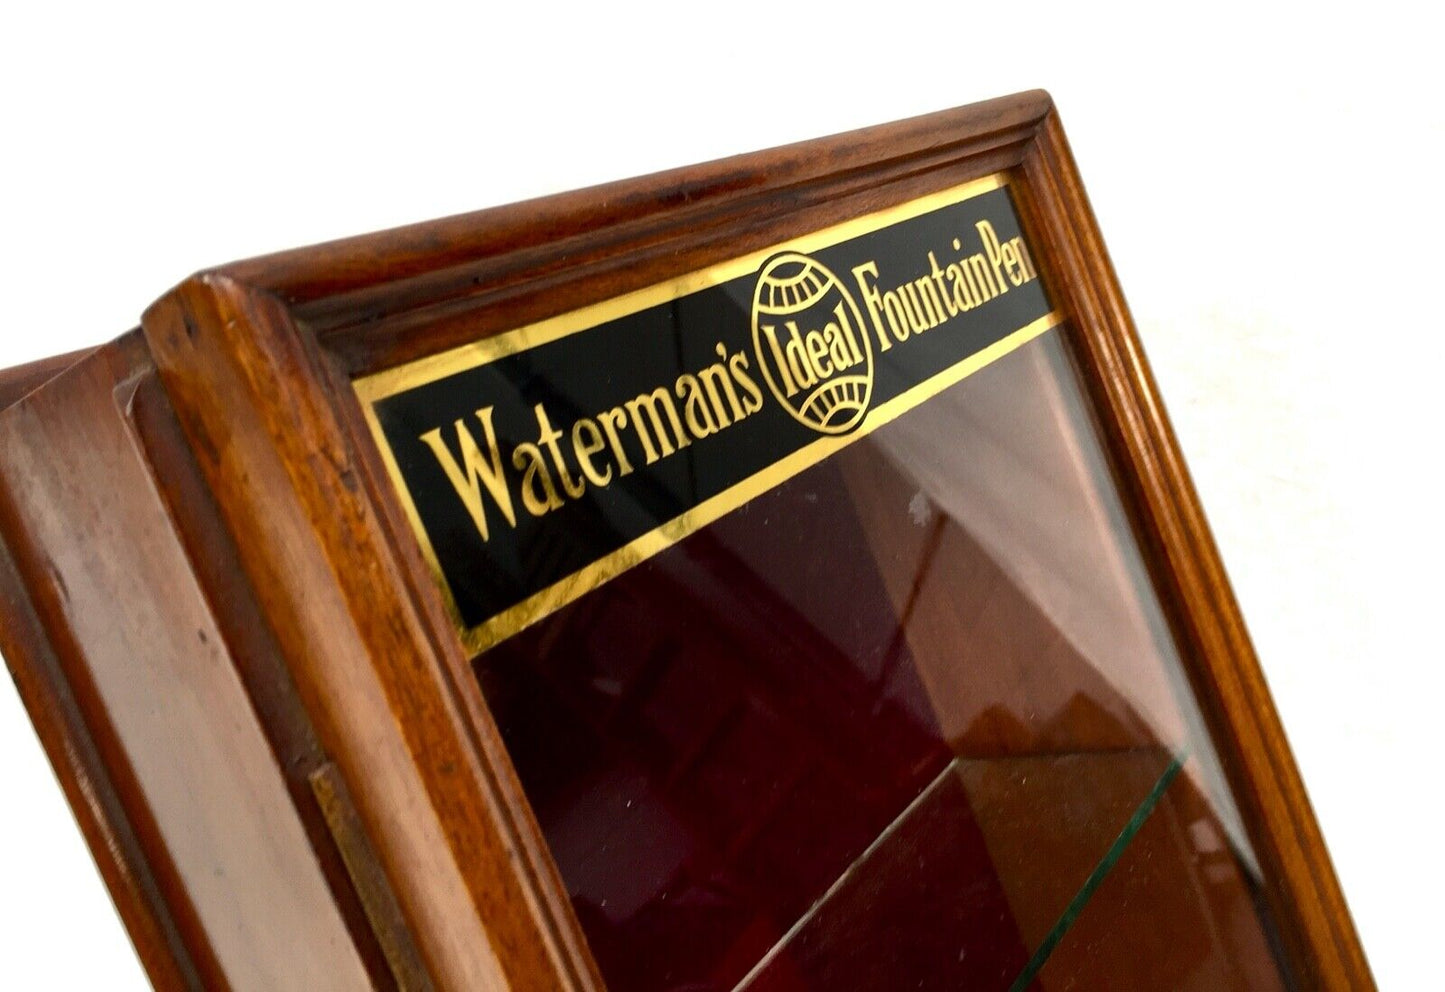 Antique Wooden Glazed Shop Display Counter Cabinet for Waterman's Fountain Pens